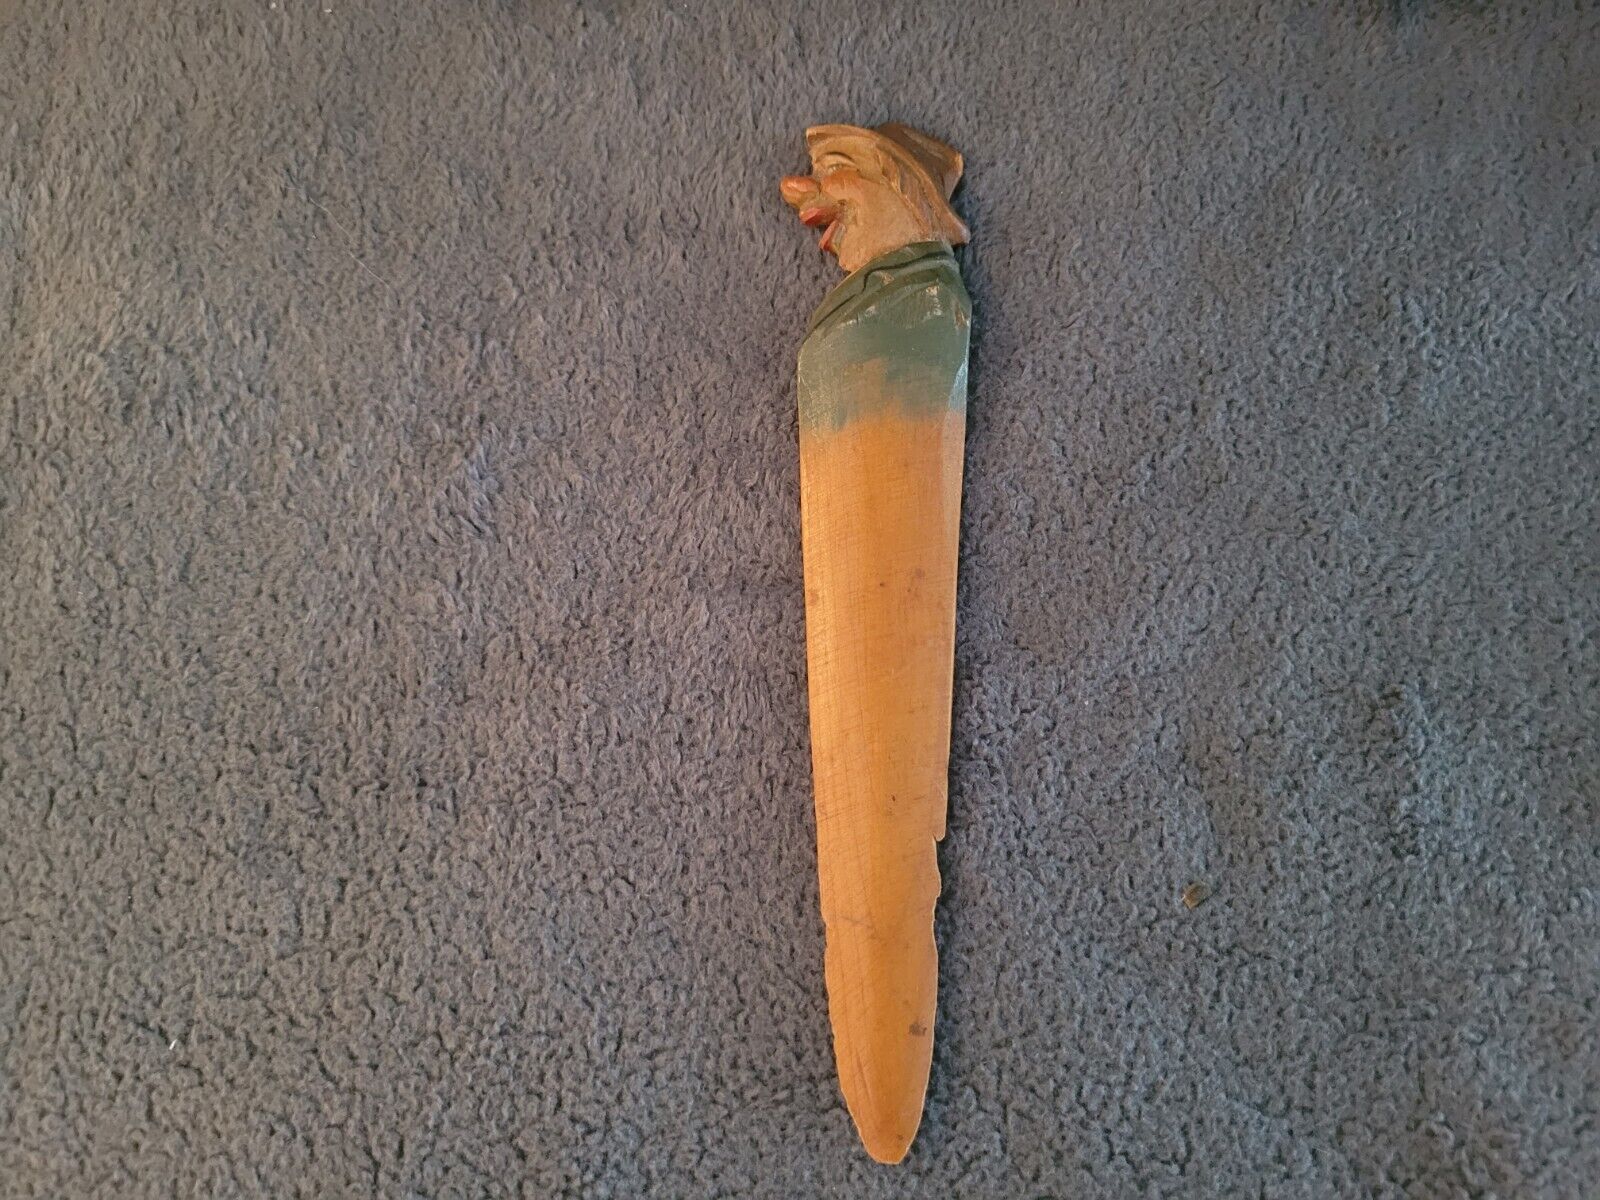 UNIQUE AWESOME Vintage Wood Letter Opener with Hobo on Top - RARE ANTIQUE